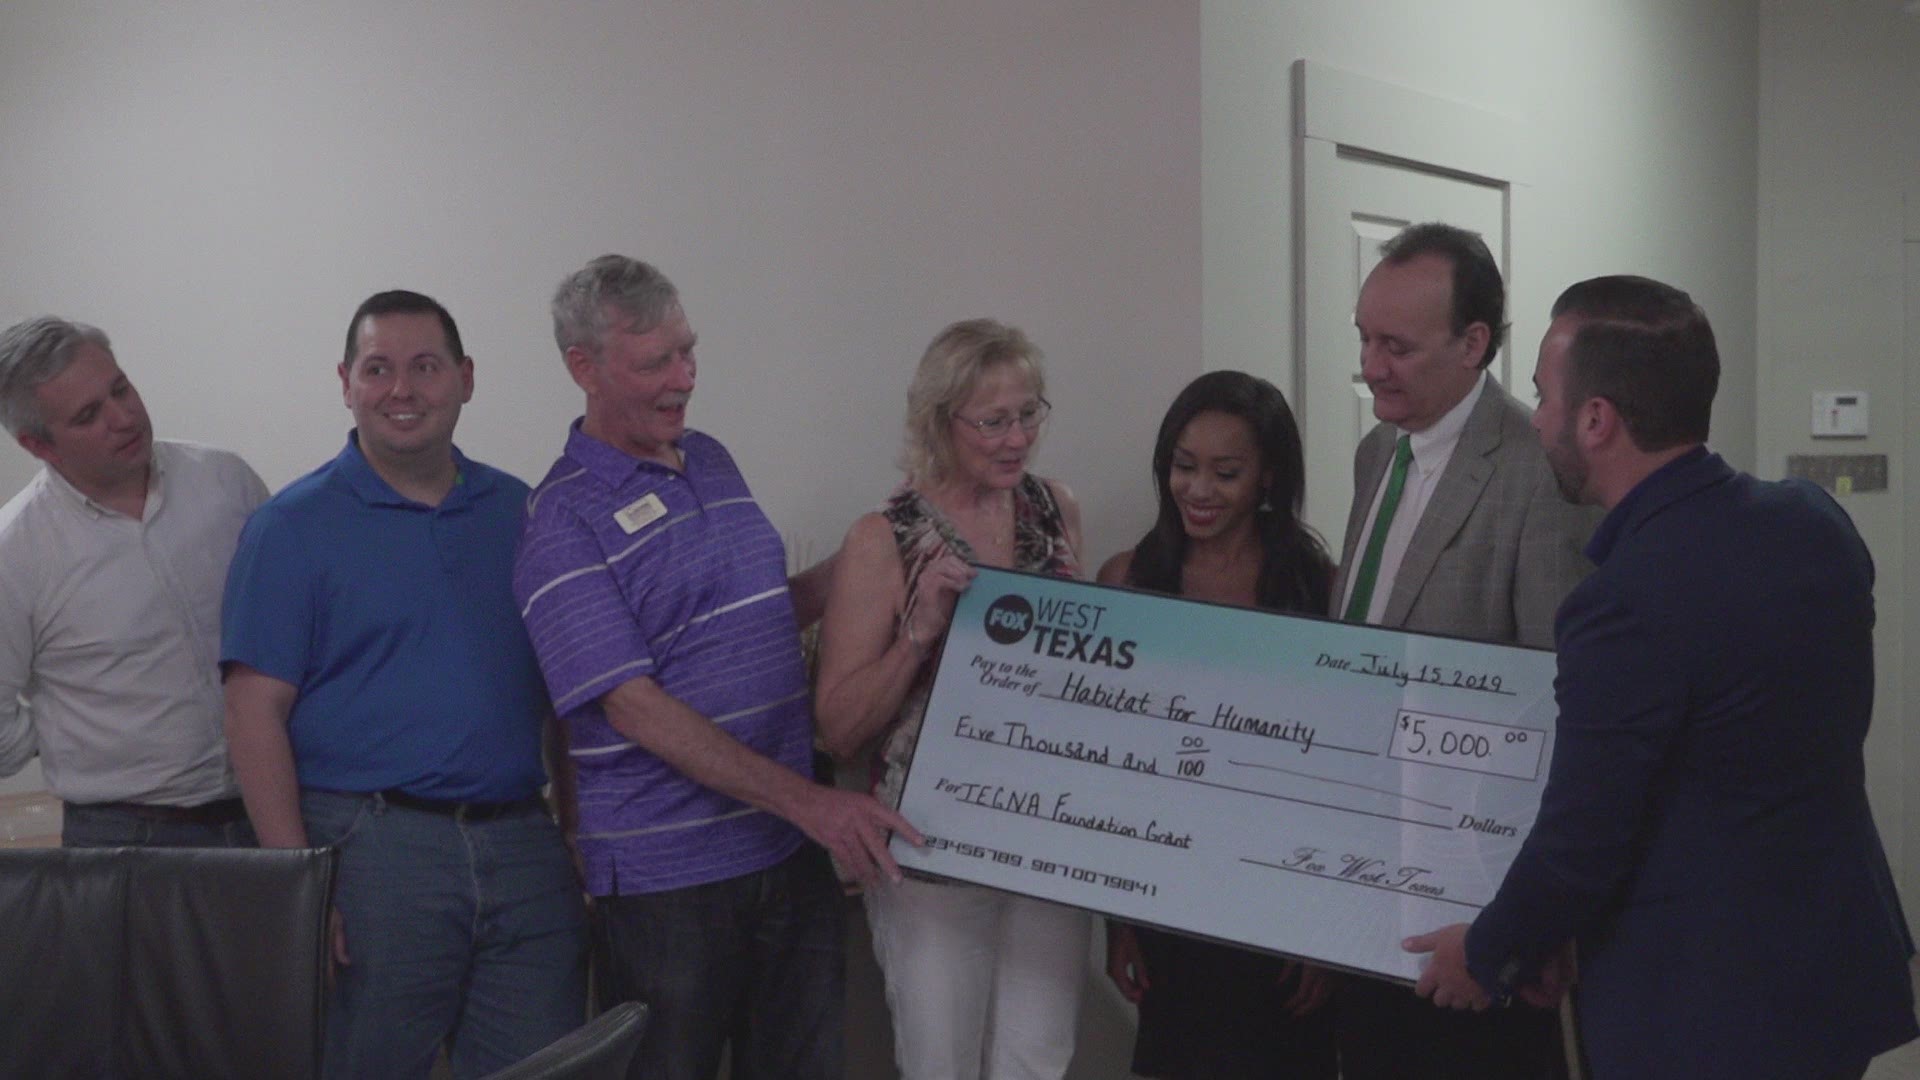 FOX West Texas donated $5,000 to Habitat for Humanity in San Angelo to help build homes for families in need.